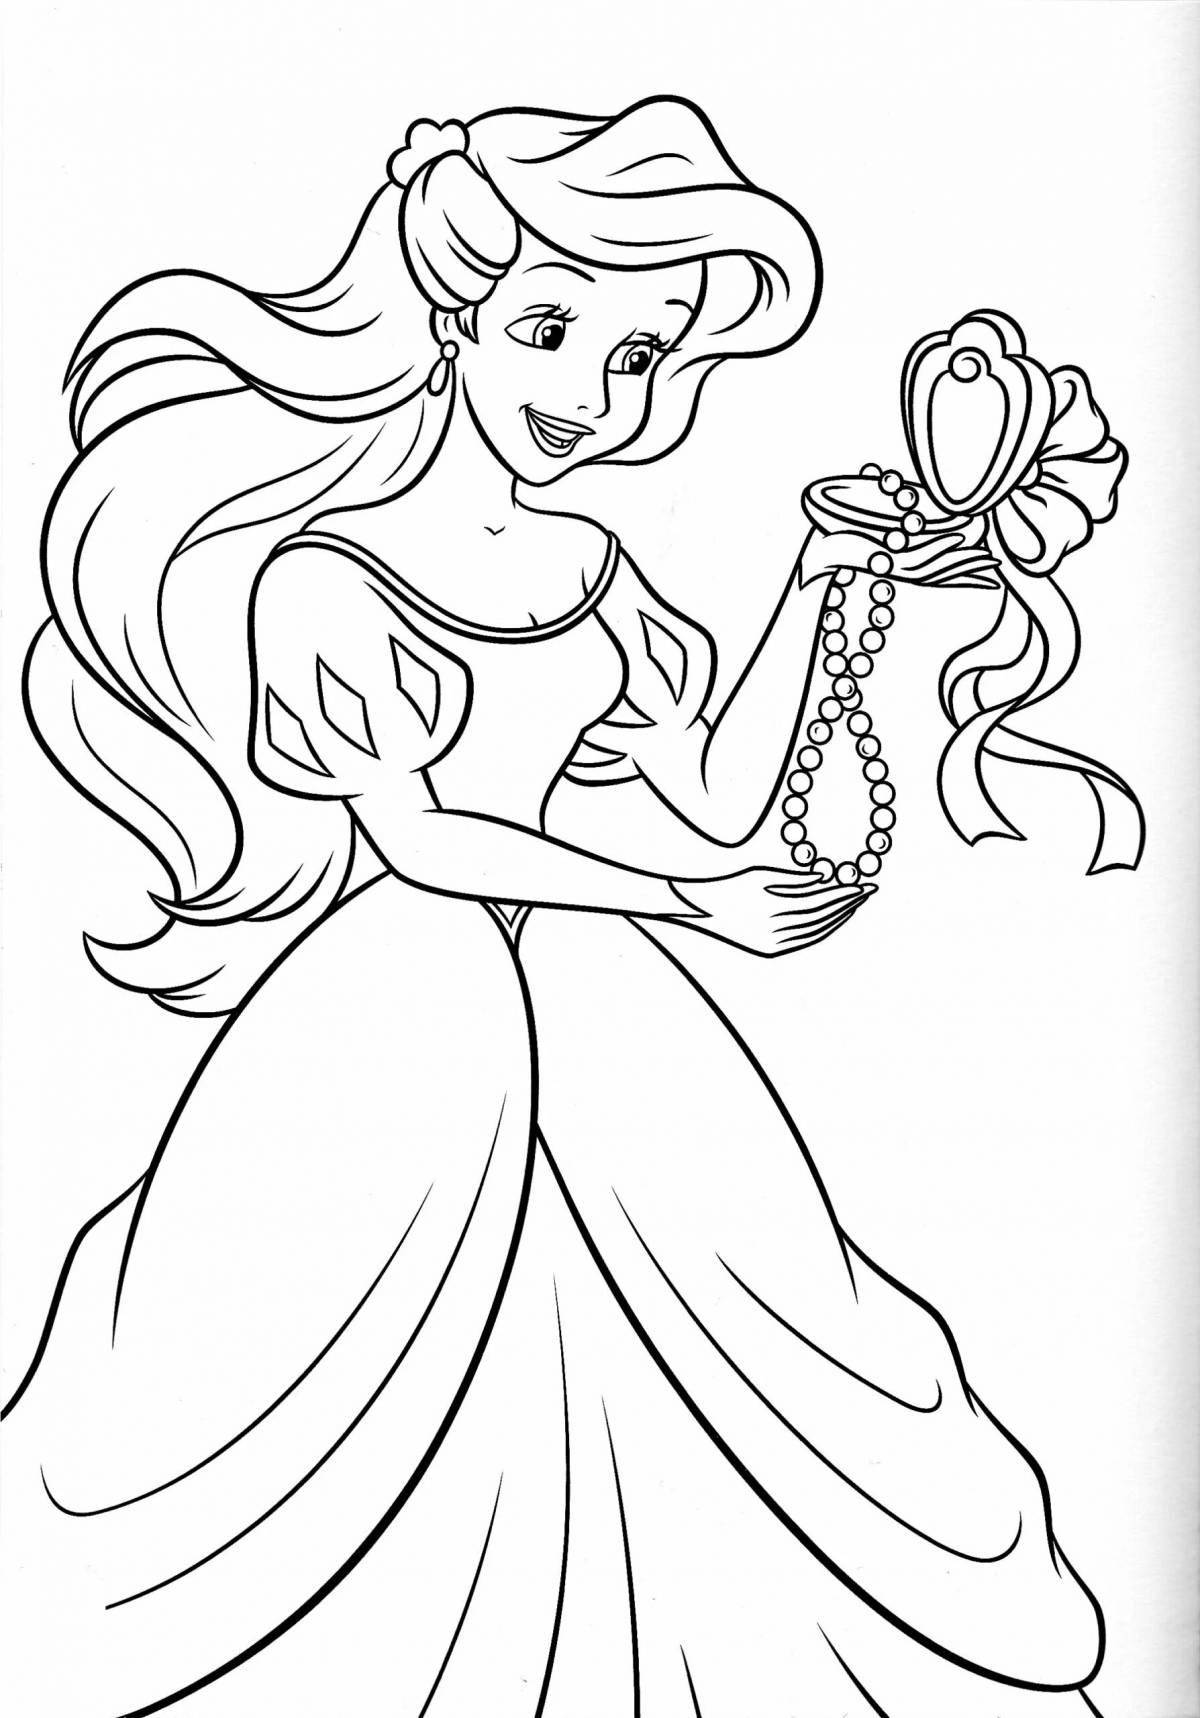 Magic princess coloring pages for girls 4 years old